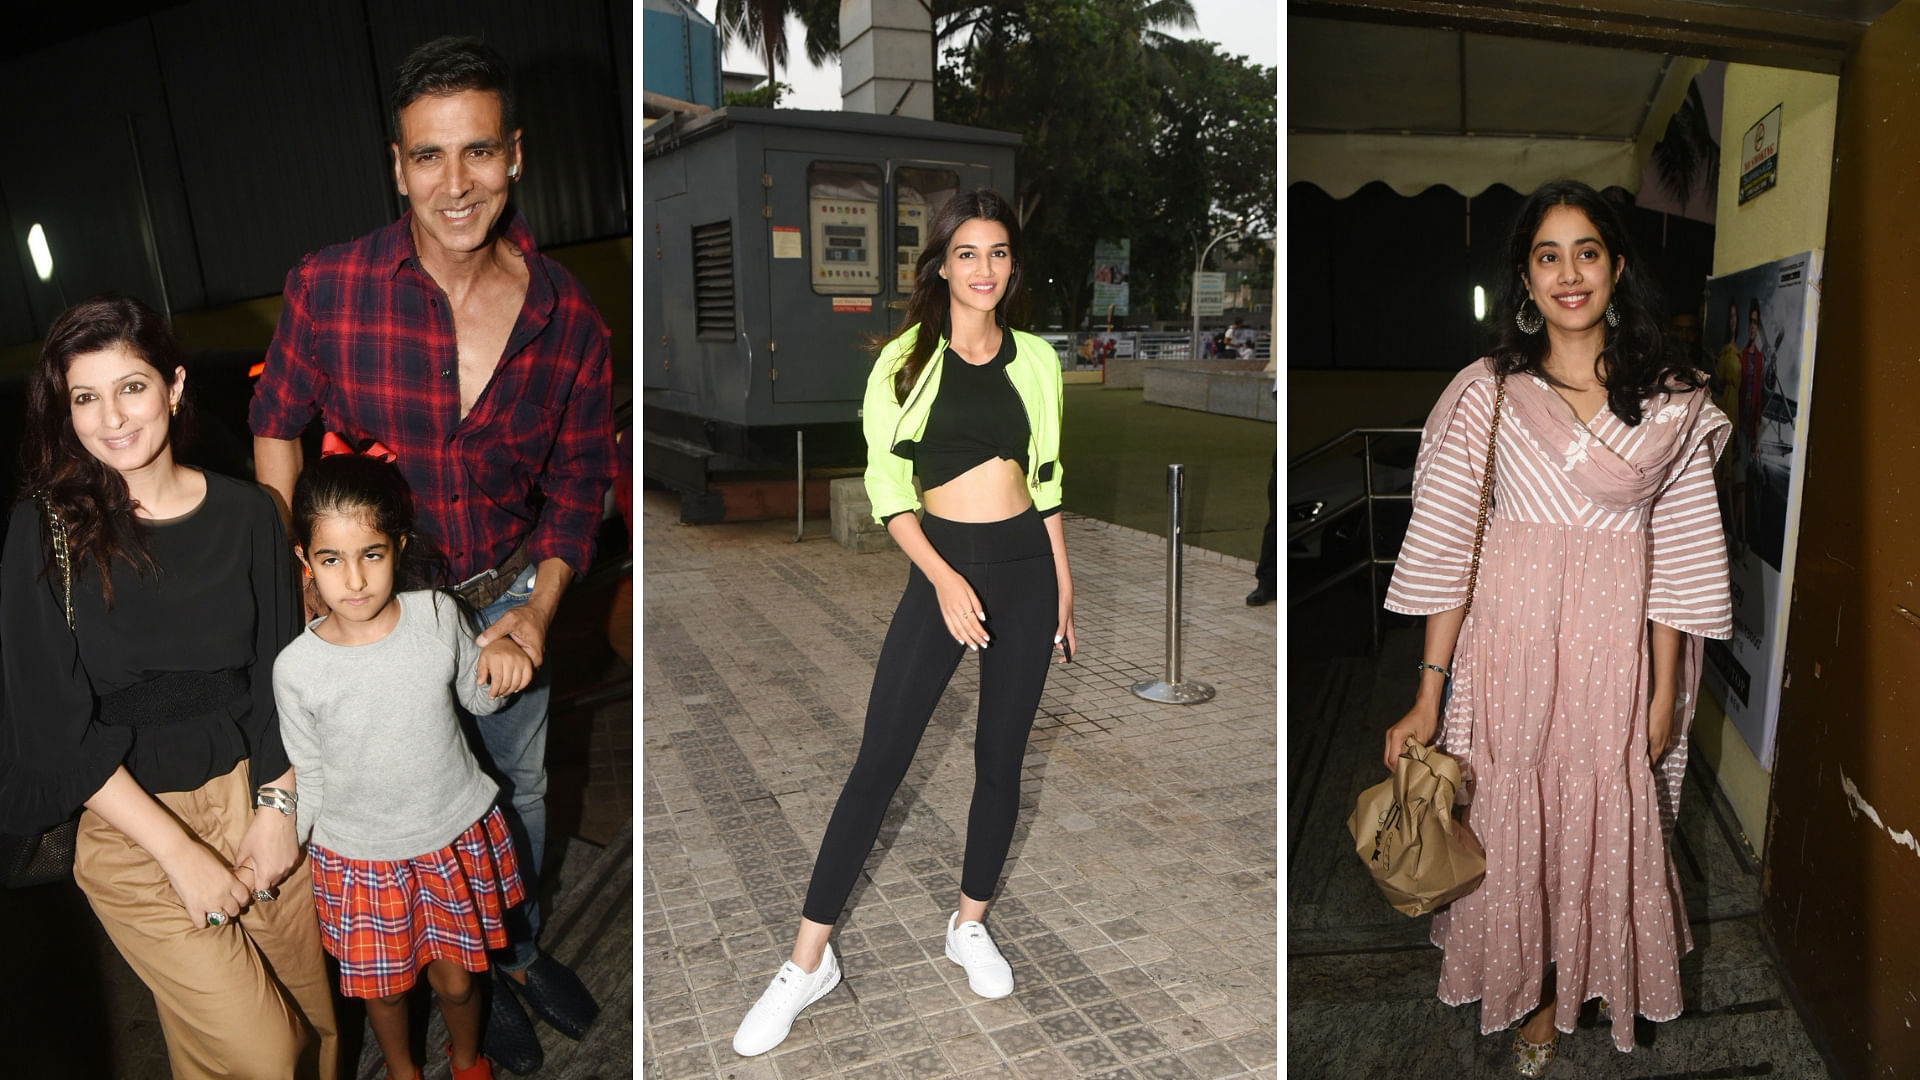 Akshay Kumar &amp; Twinkle Khanna with their daughter, Kriti Sanon and Jahnvi Kapoor at the screening.